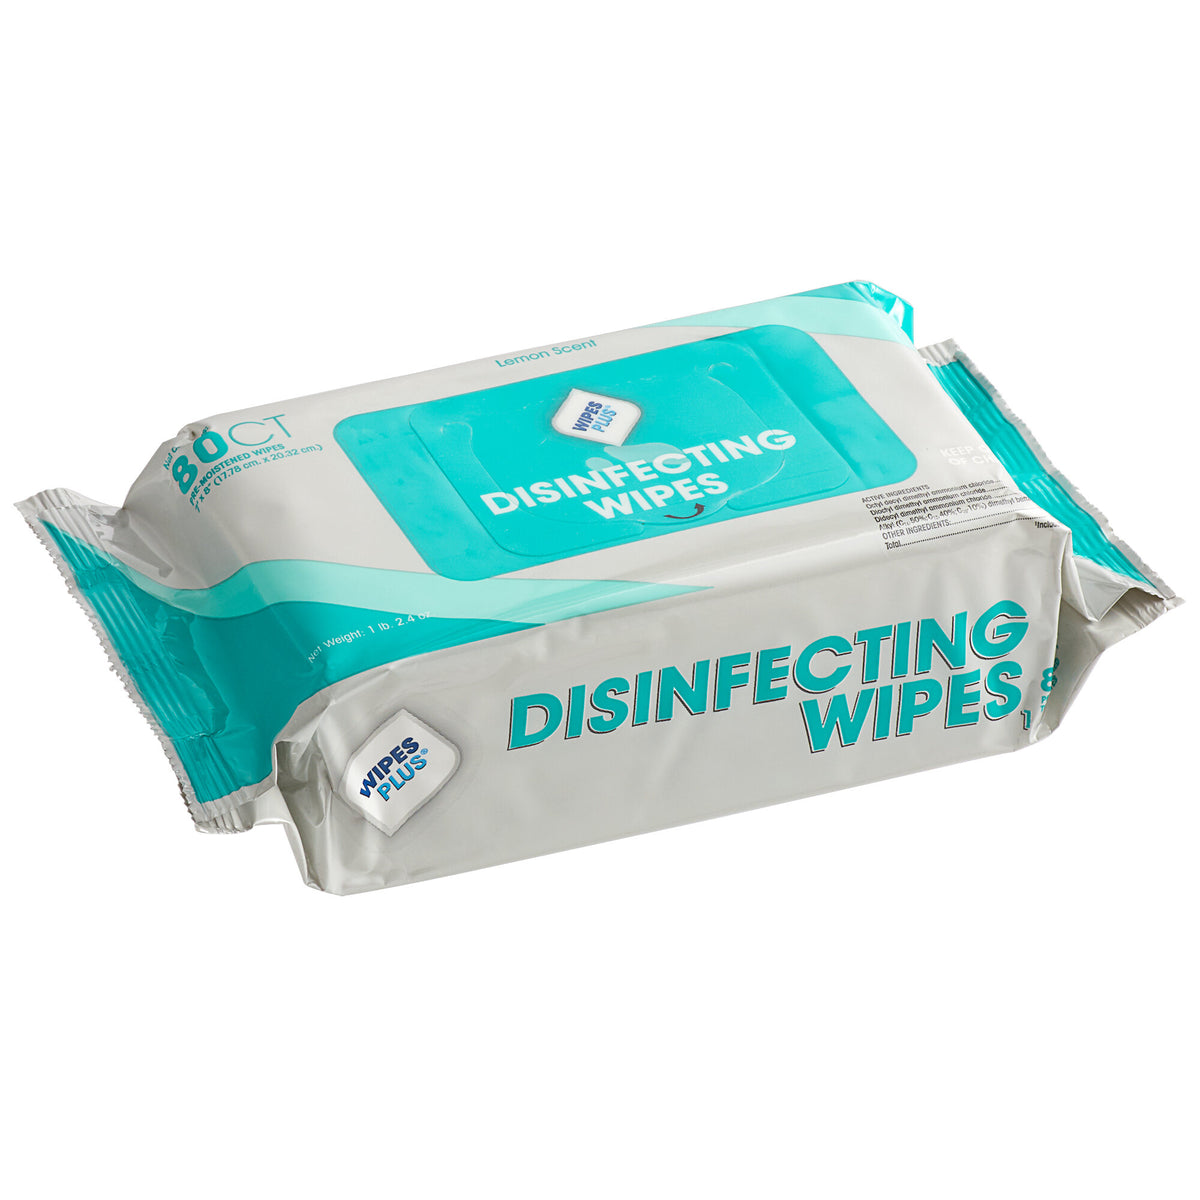 Wipe Out! 80-Pack 80-Count Citrus Hand Sanitizer Wipes at